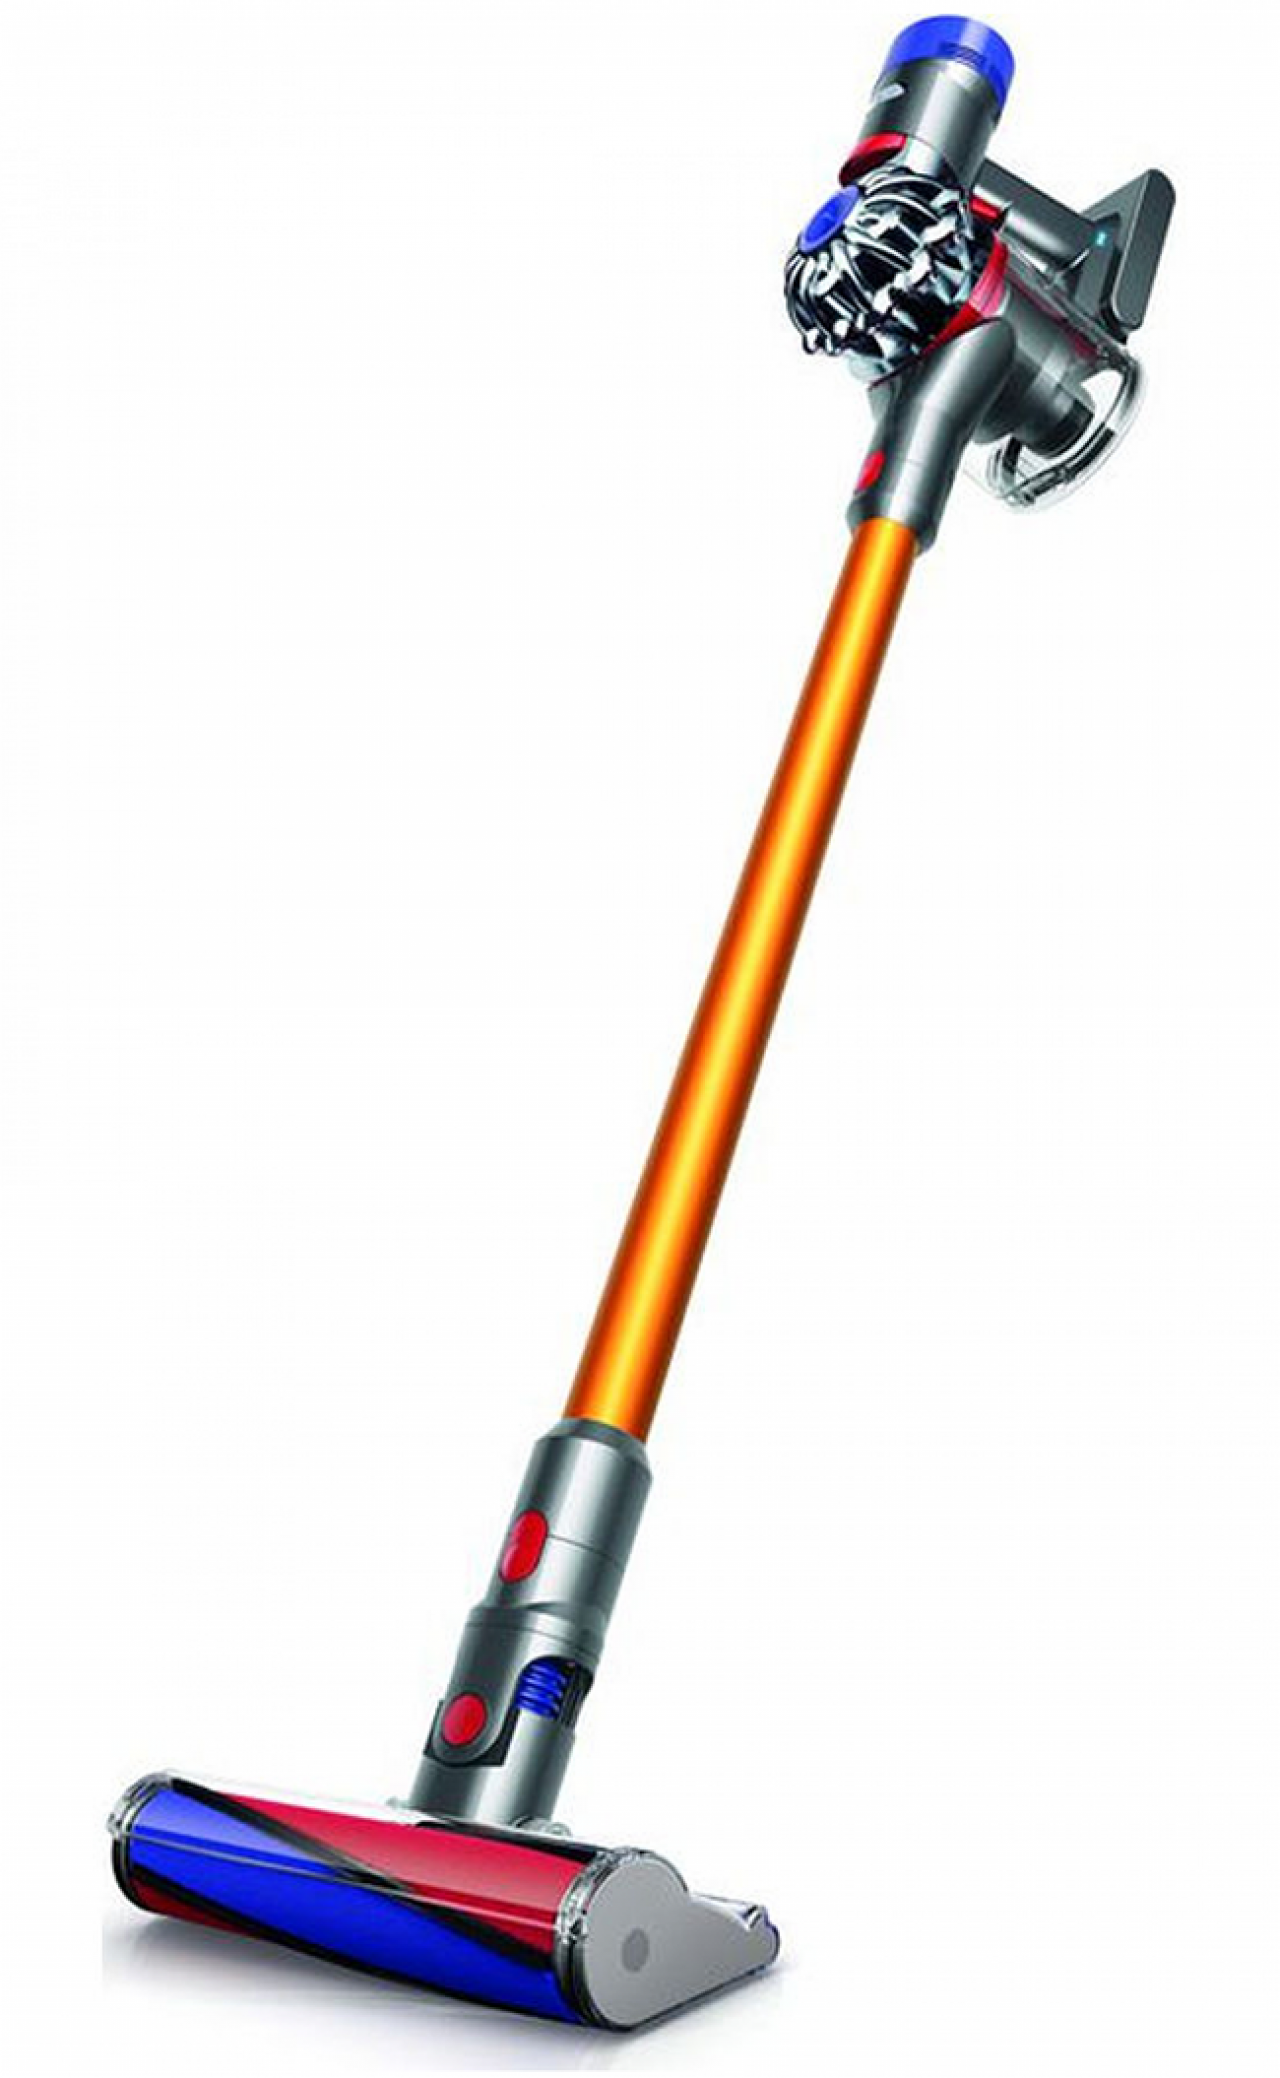 Dyson V8 Cordless is easy to move